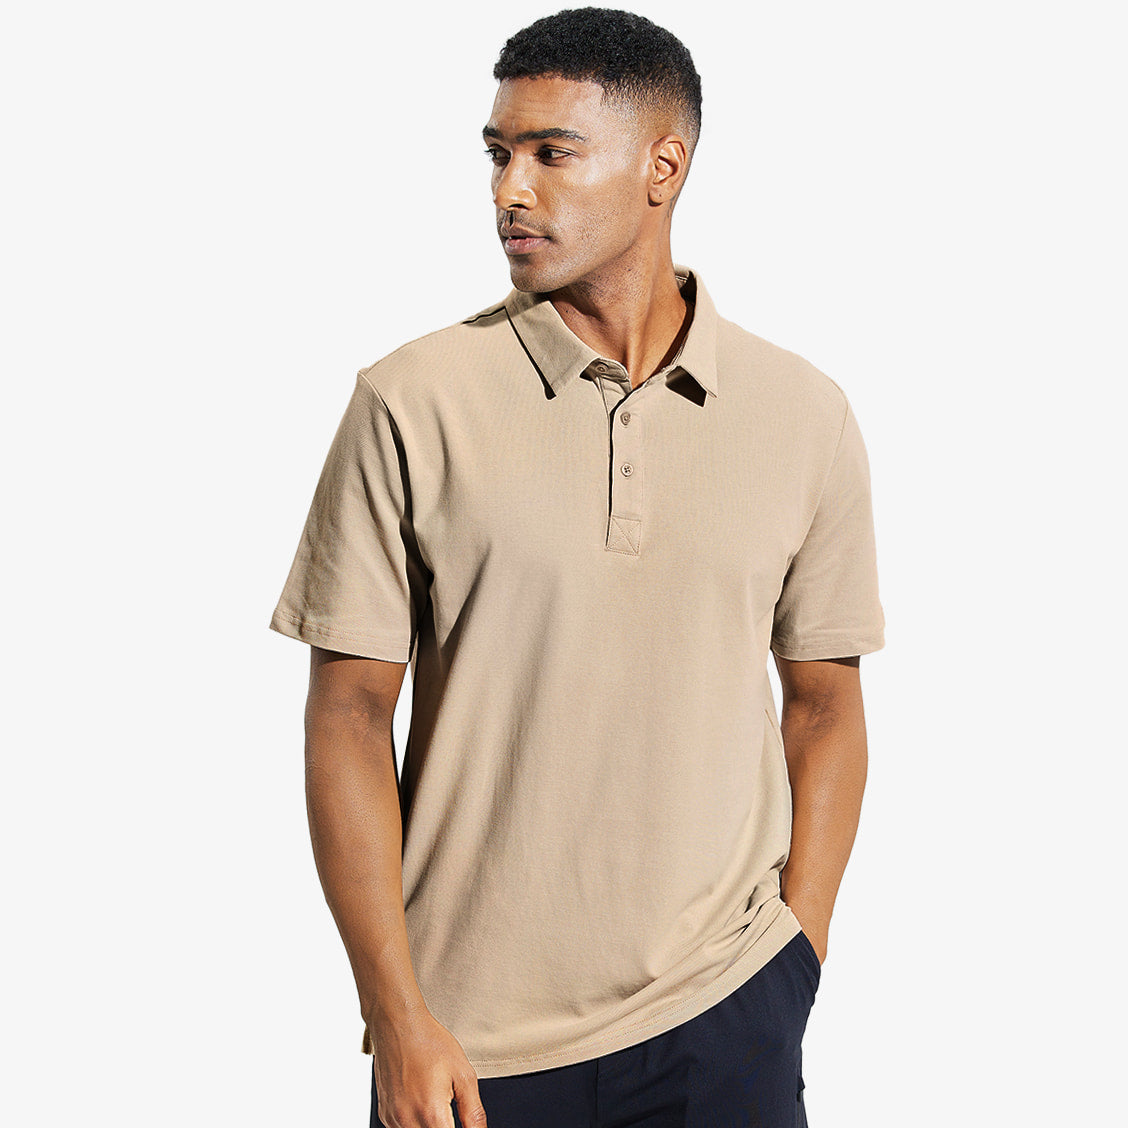 Cathalem Men's Golf Polo Shirts Classic Fit Long Sleeve Solid Soft Cotton  Polo Shirt,Beige XXXL